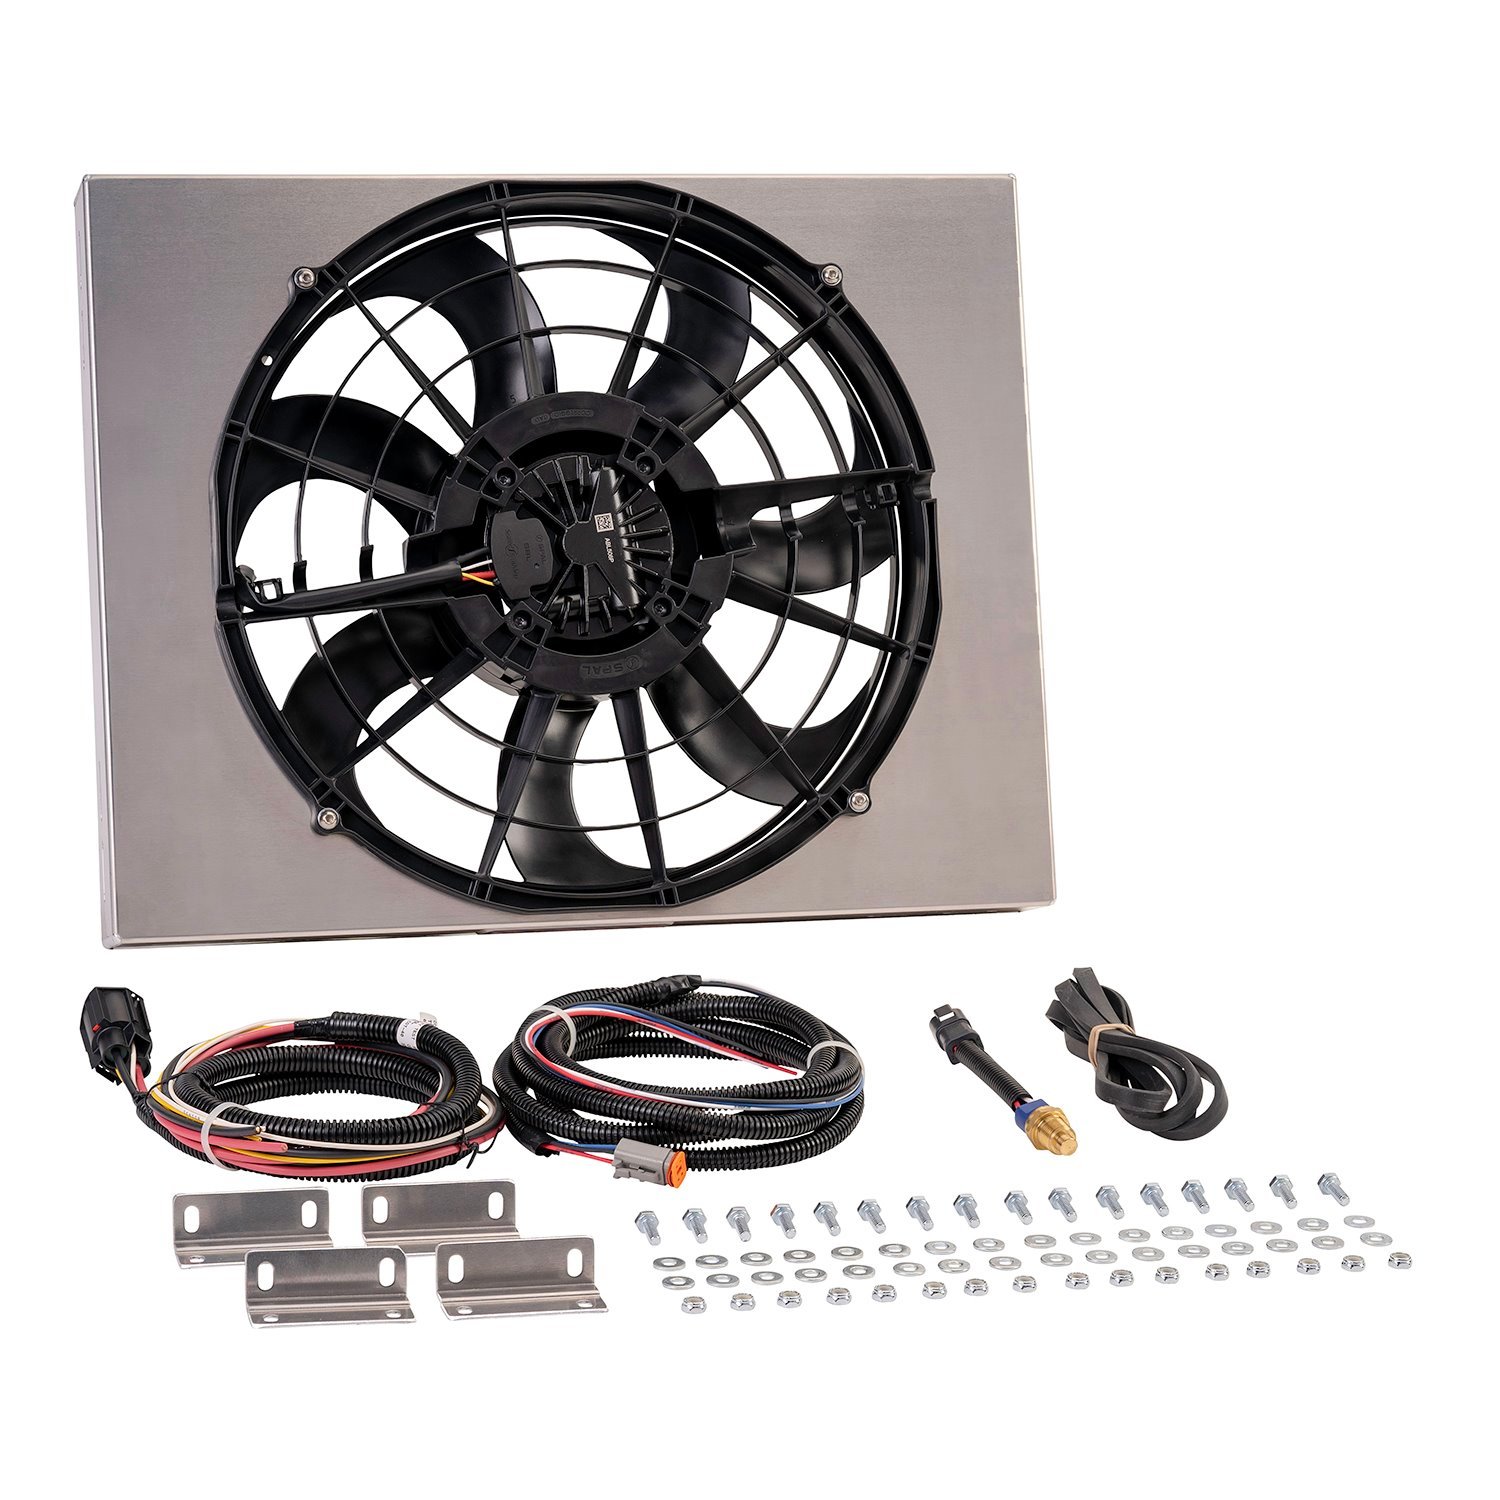 67922-215 Brushless Single Powerpack 17 in. Radiator Fan Assembly with Integrated 215 Degree PWM Controller